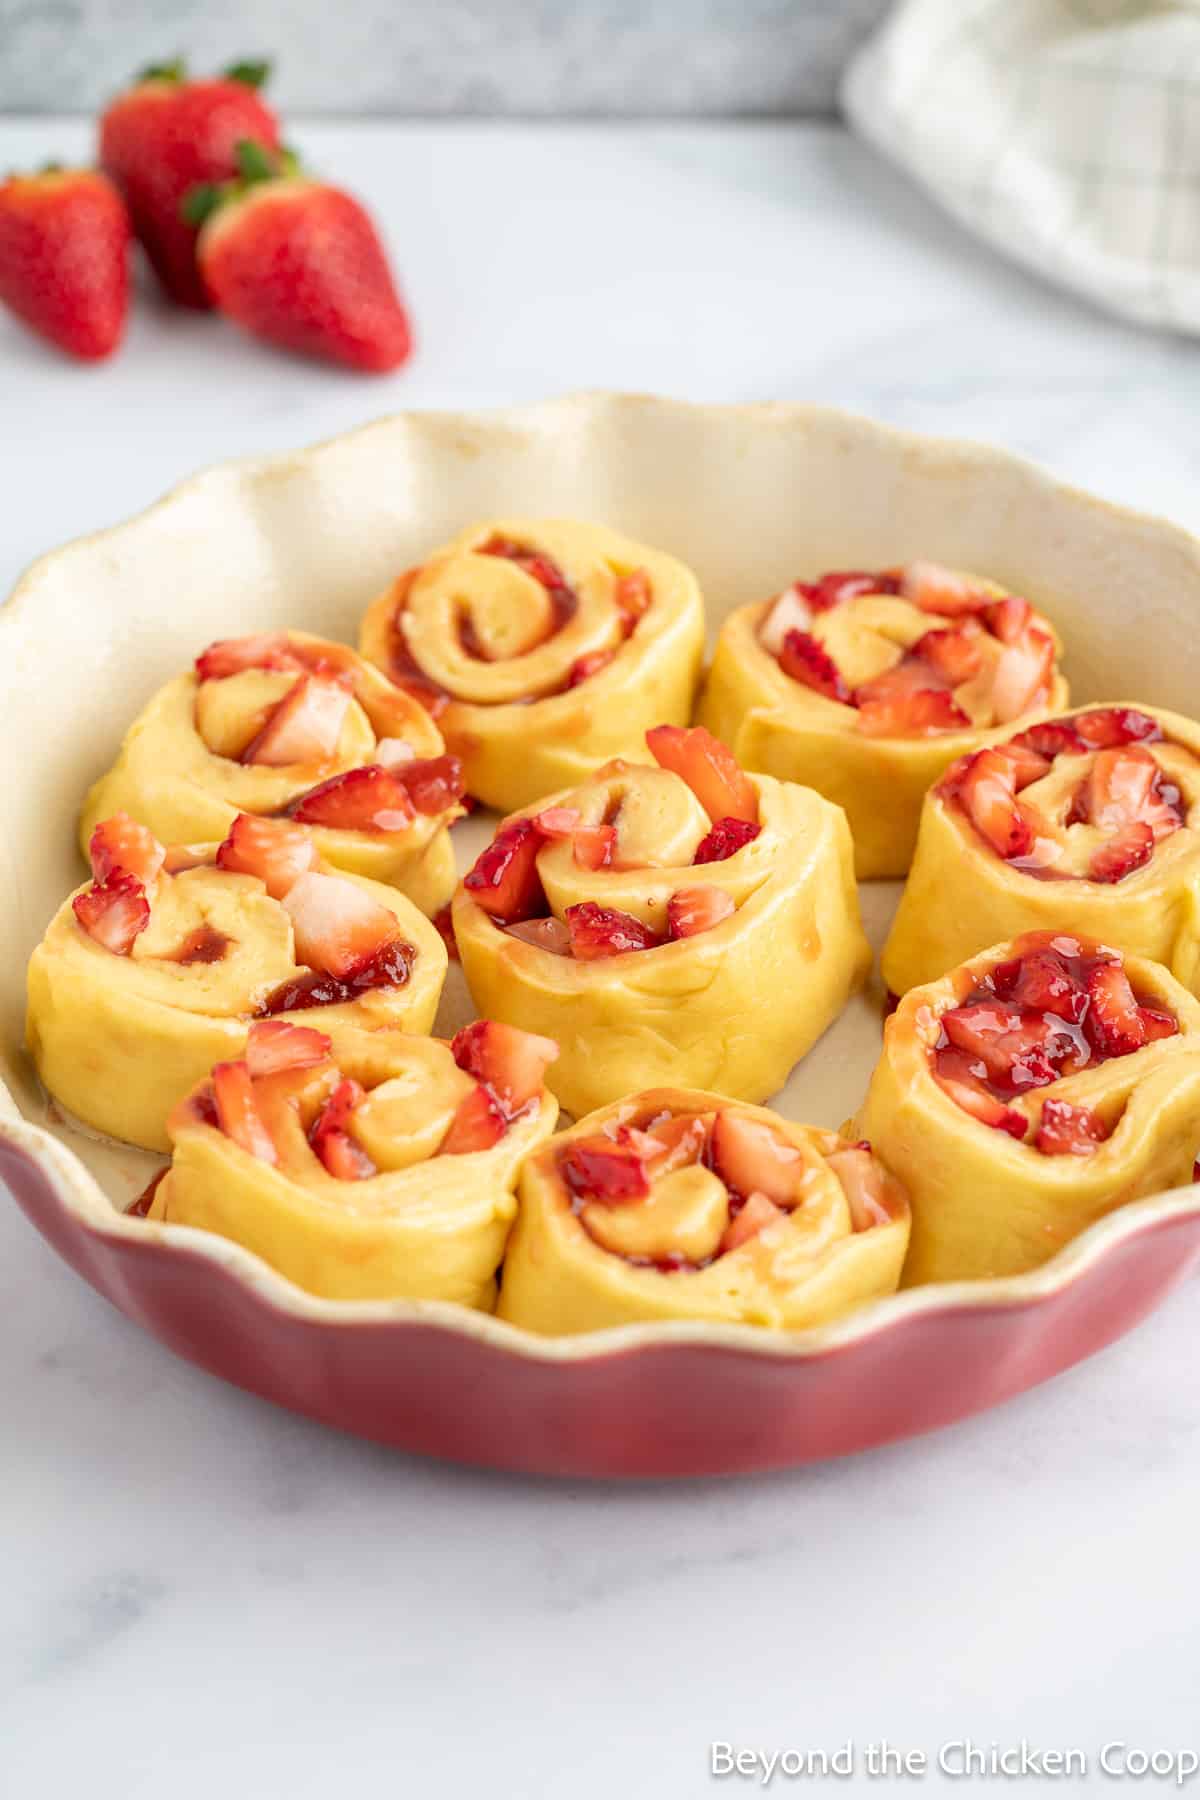 Unbaked cinnamon rolls filled with strawberries. 